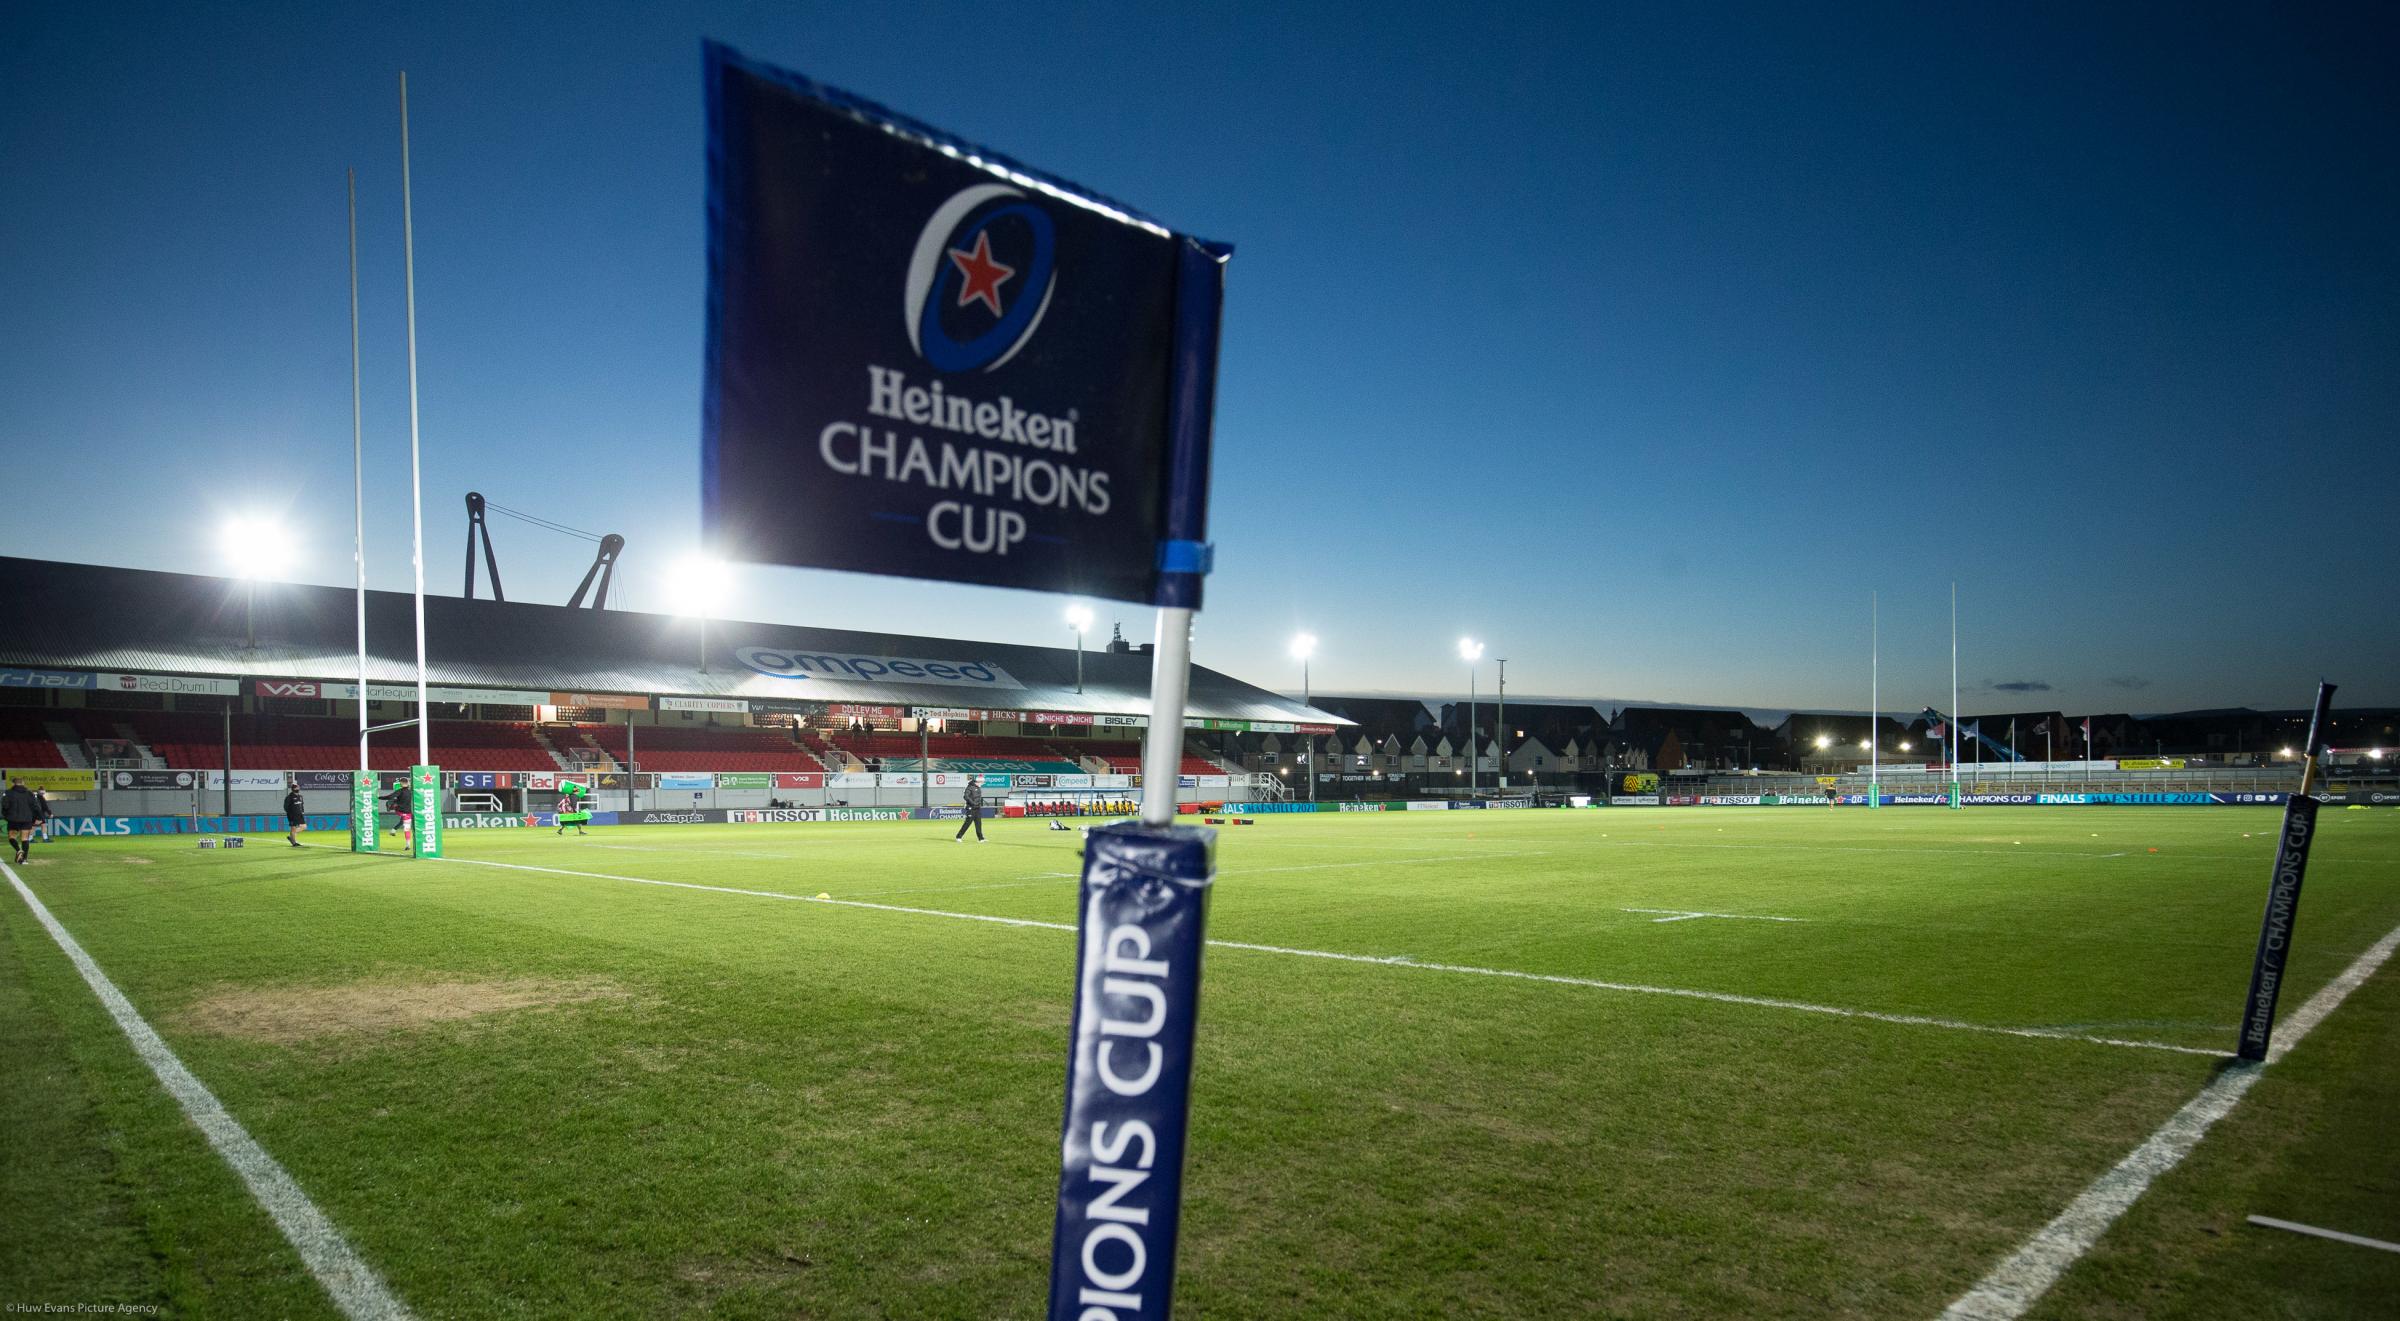 The Dragons returned to European rugbys top tier in the Champions Cup this season